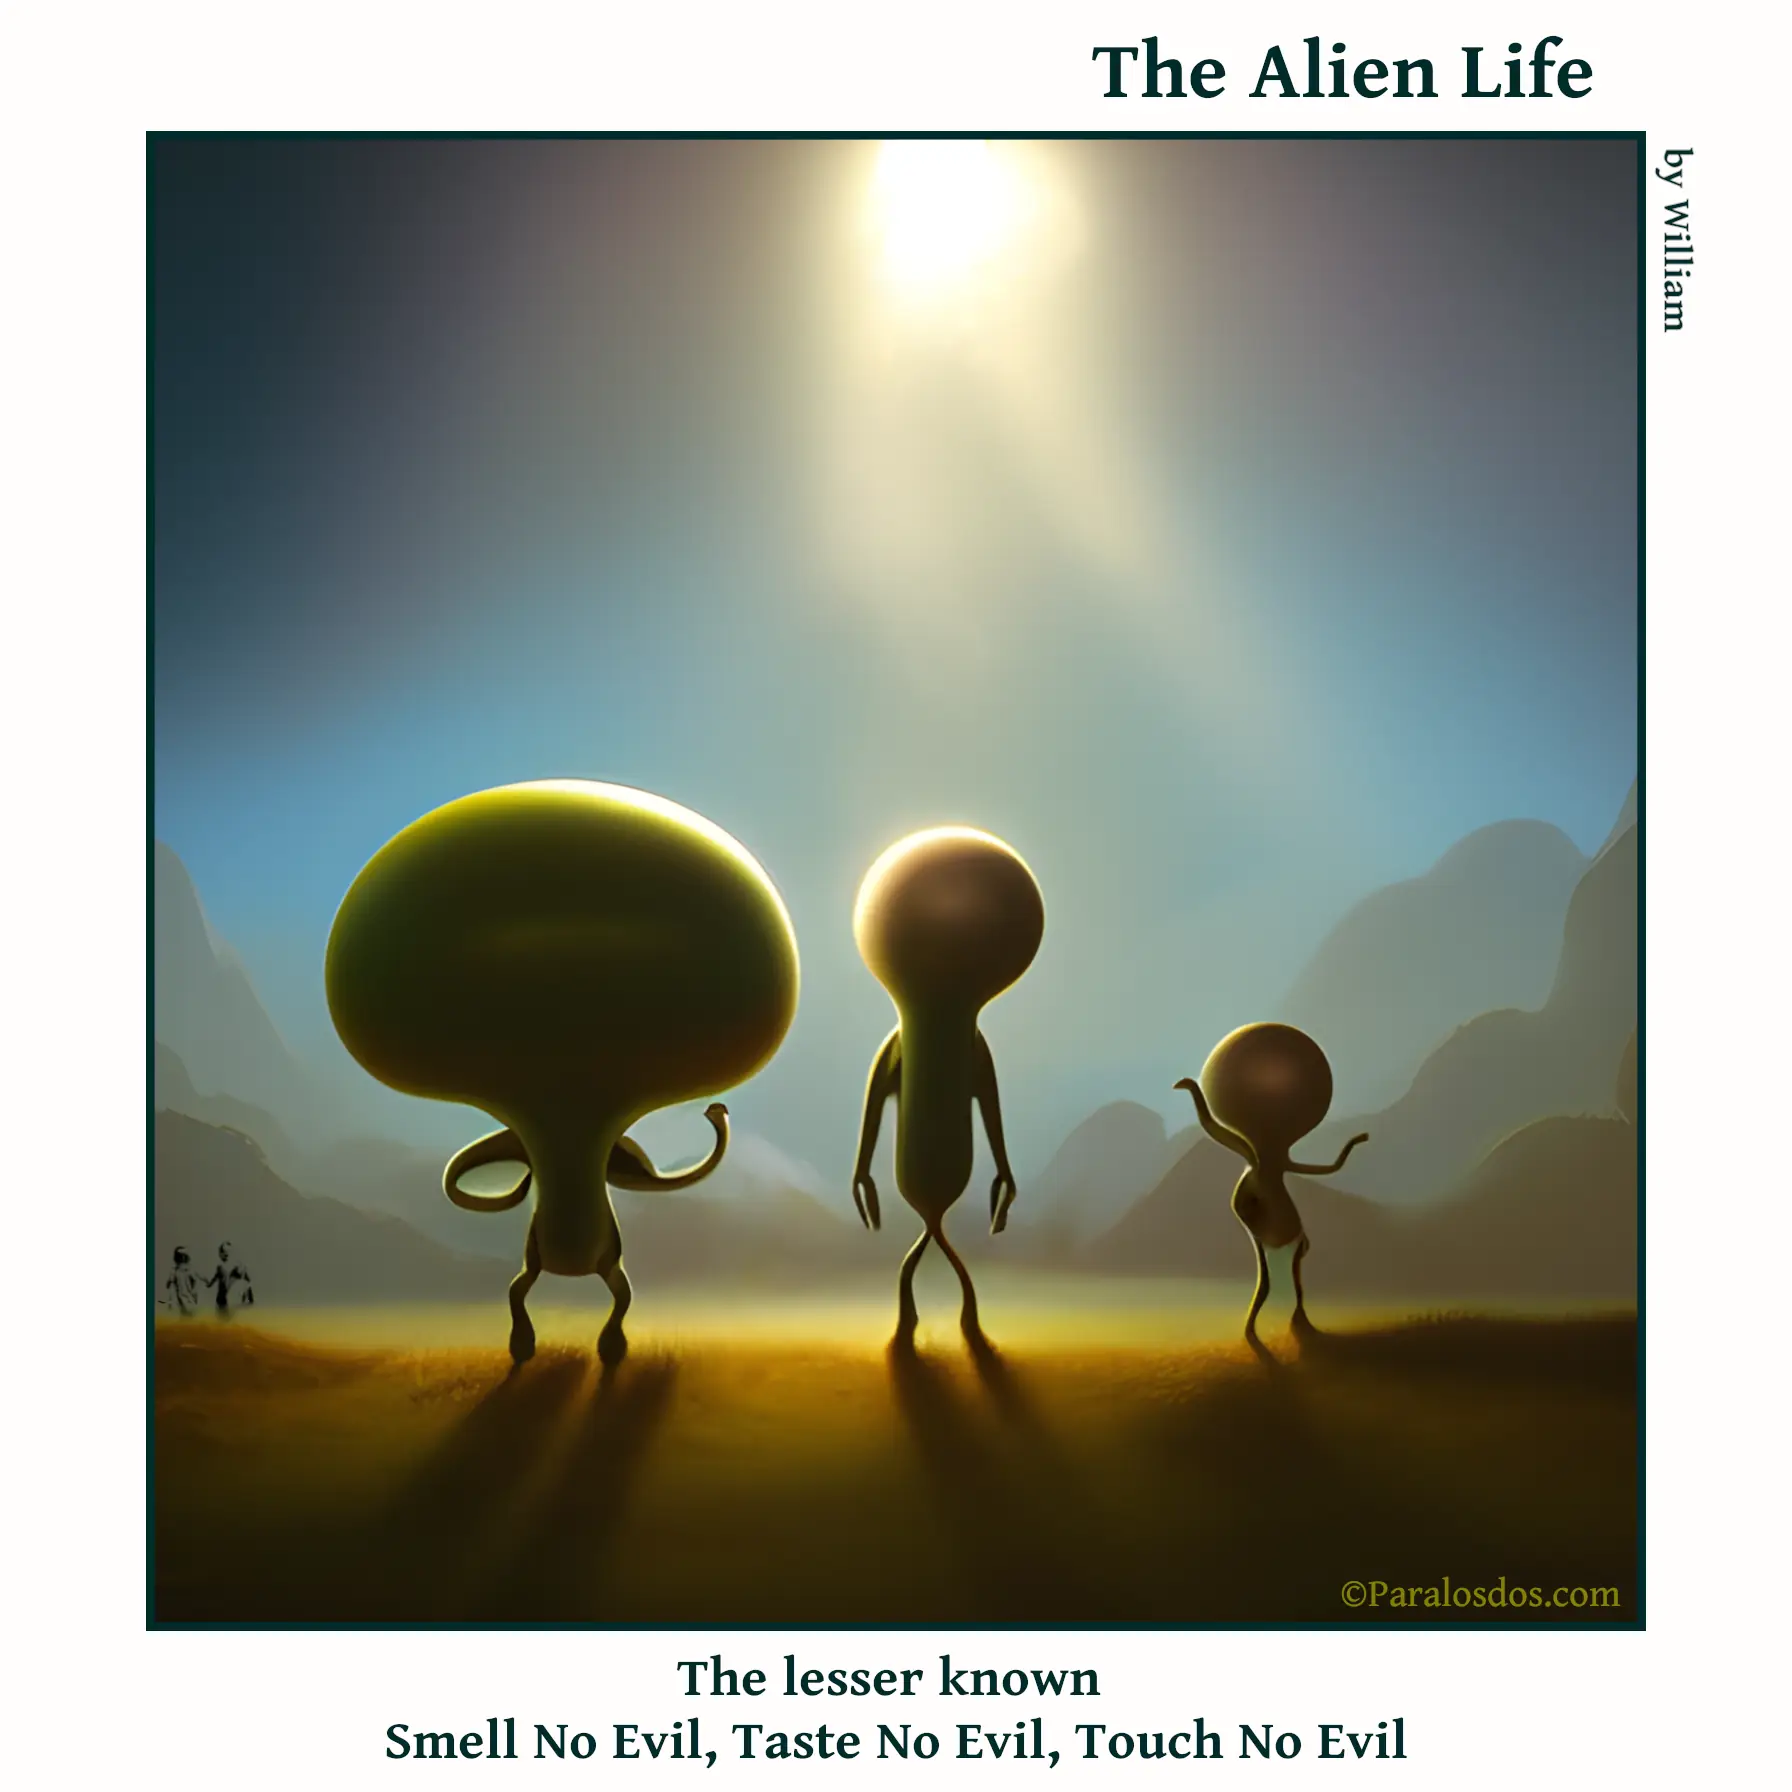 The Alien Life, one panel Comic. Three completely different aliens are standing in a row. The caption reads: "The lesser known Smell No Evil, Taste No Evil, Touch No Evil."